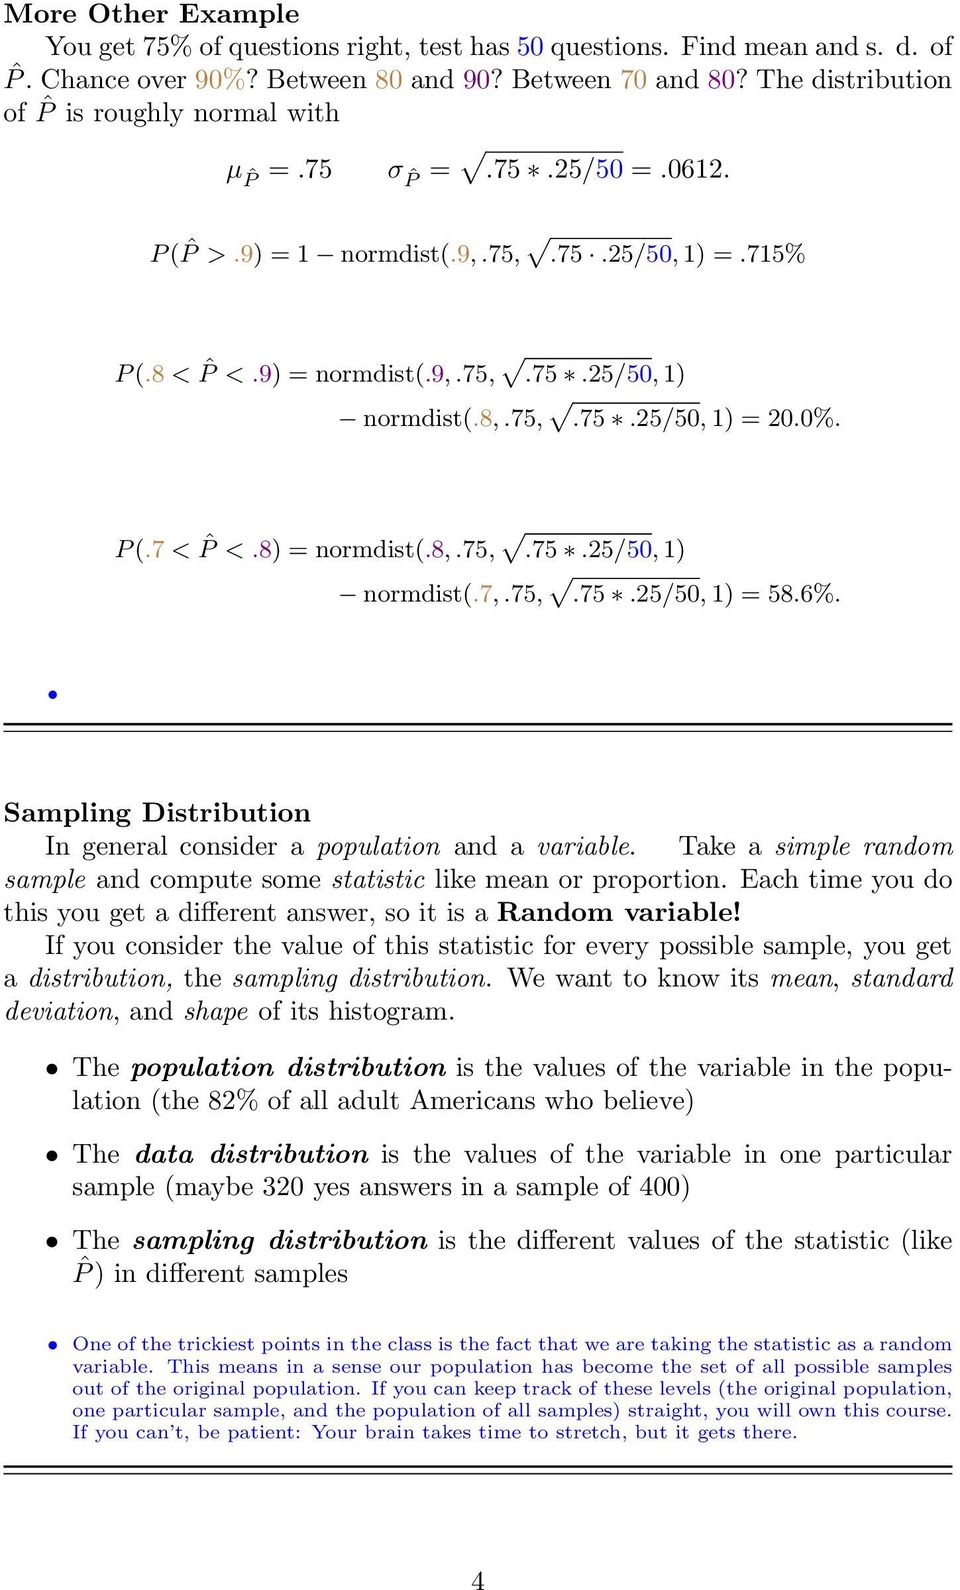 P (.7 < ˆP <.8) normdist(.8,.75,.75.25/50, 1) normdist(.7,.75,.75.25/50, 1) 58.6%. Sampling Distribution In general consider a population and a variable.